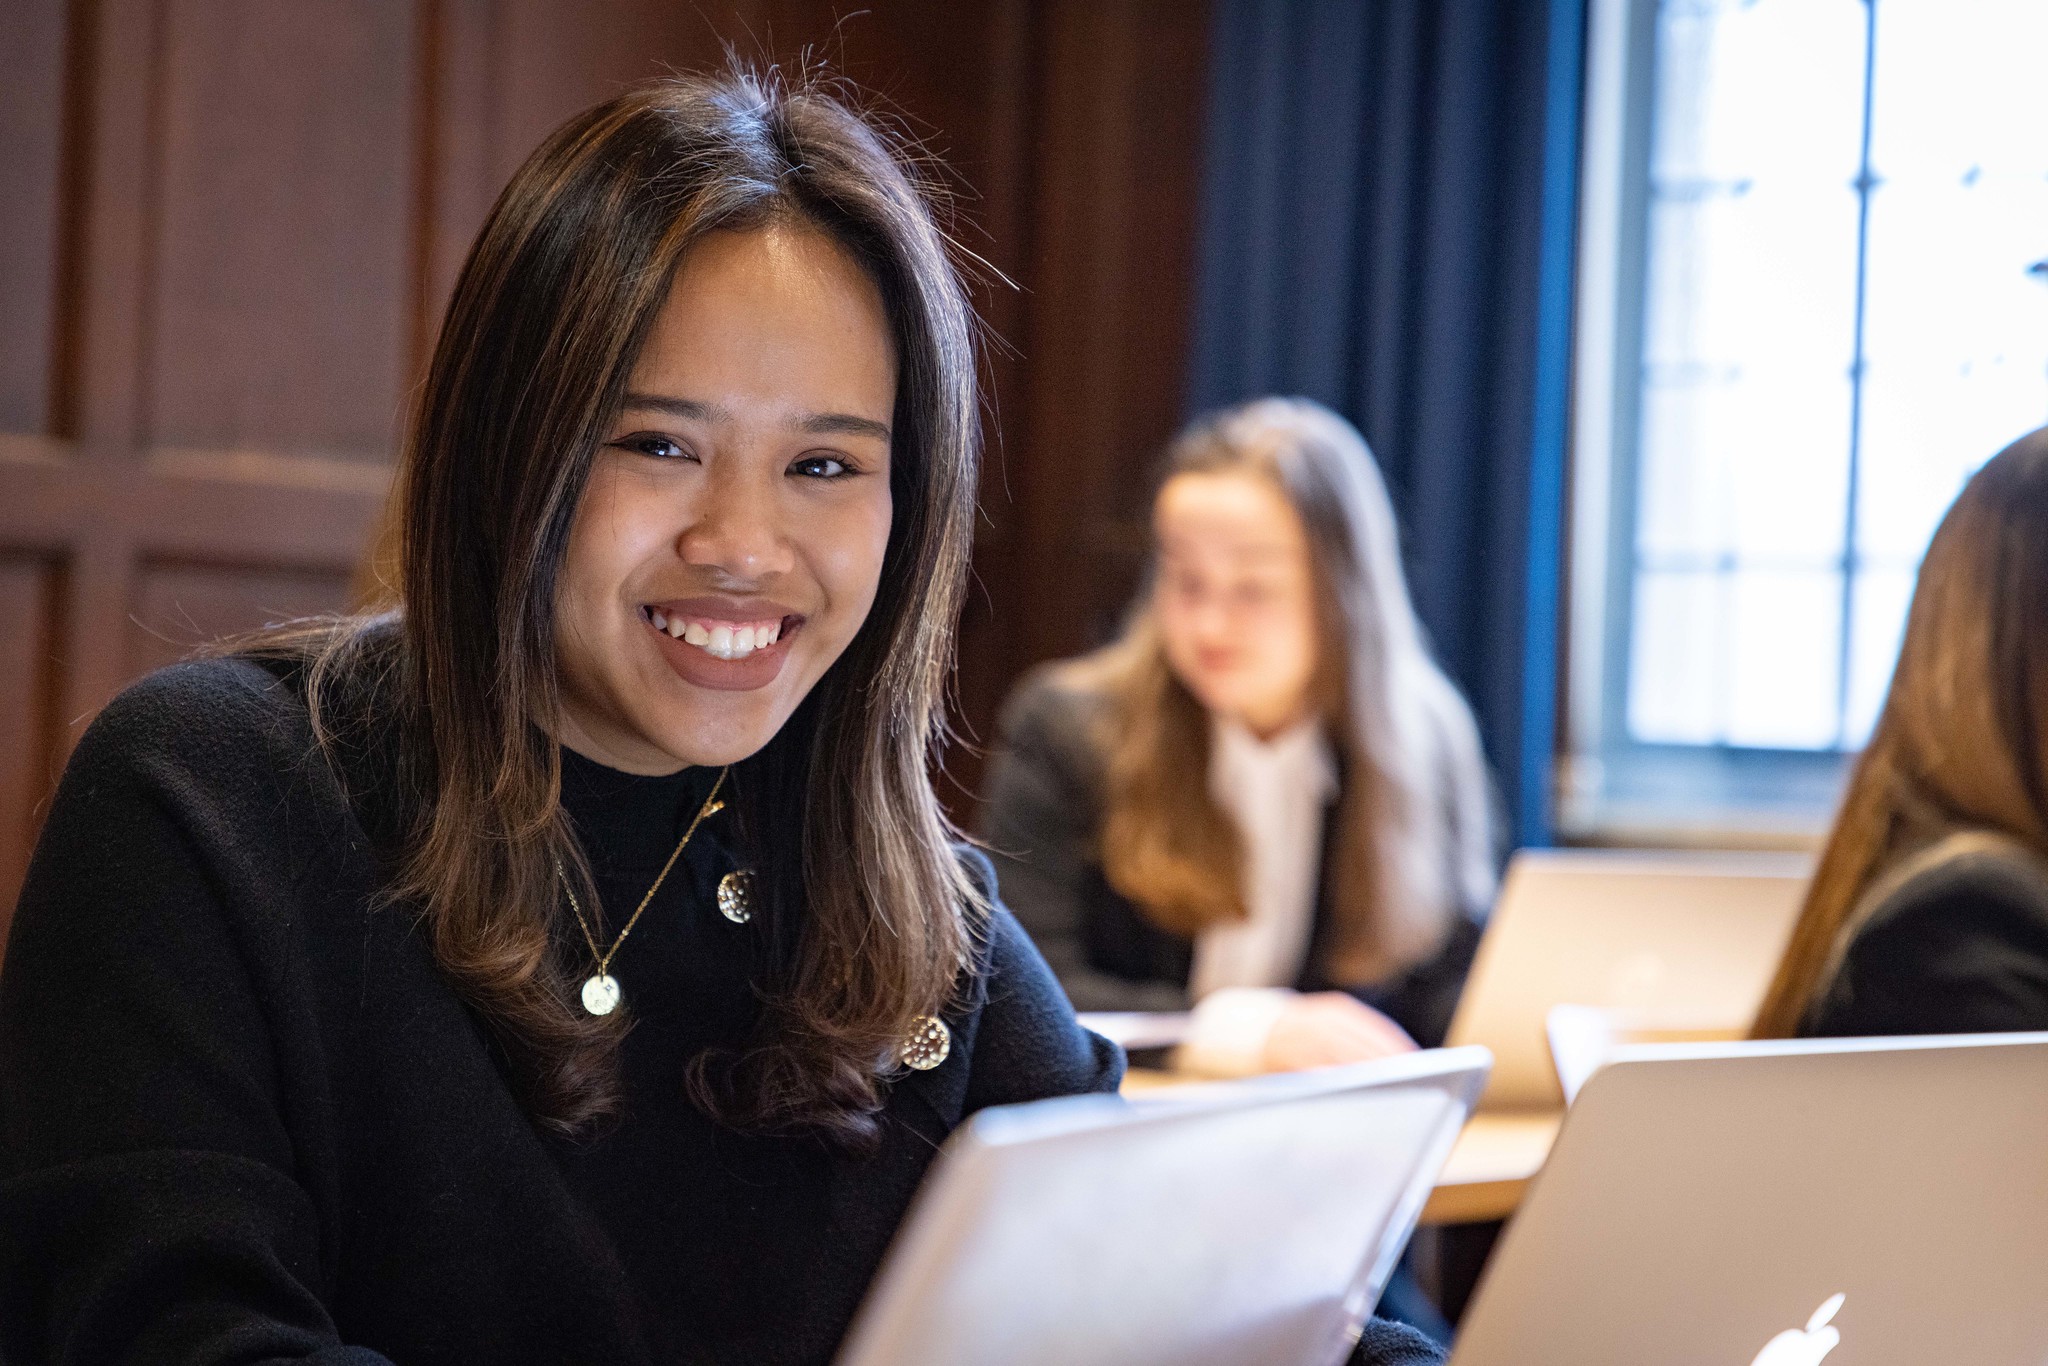 Female law student smiling using a laptop